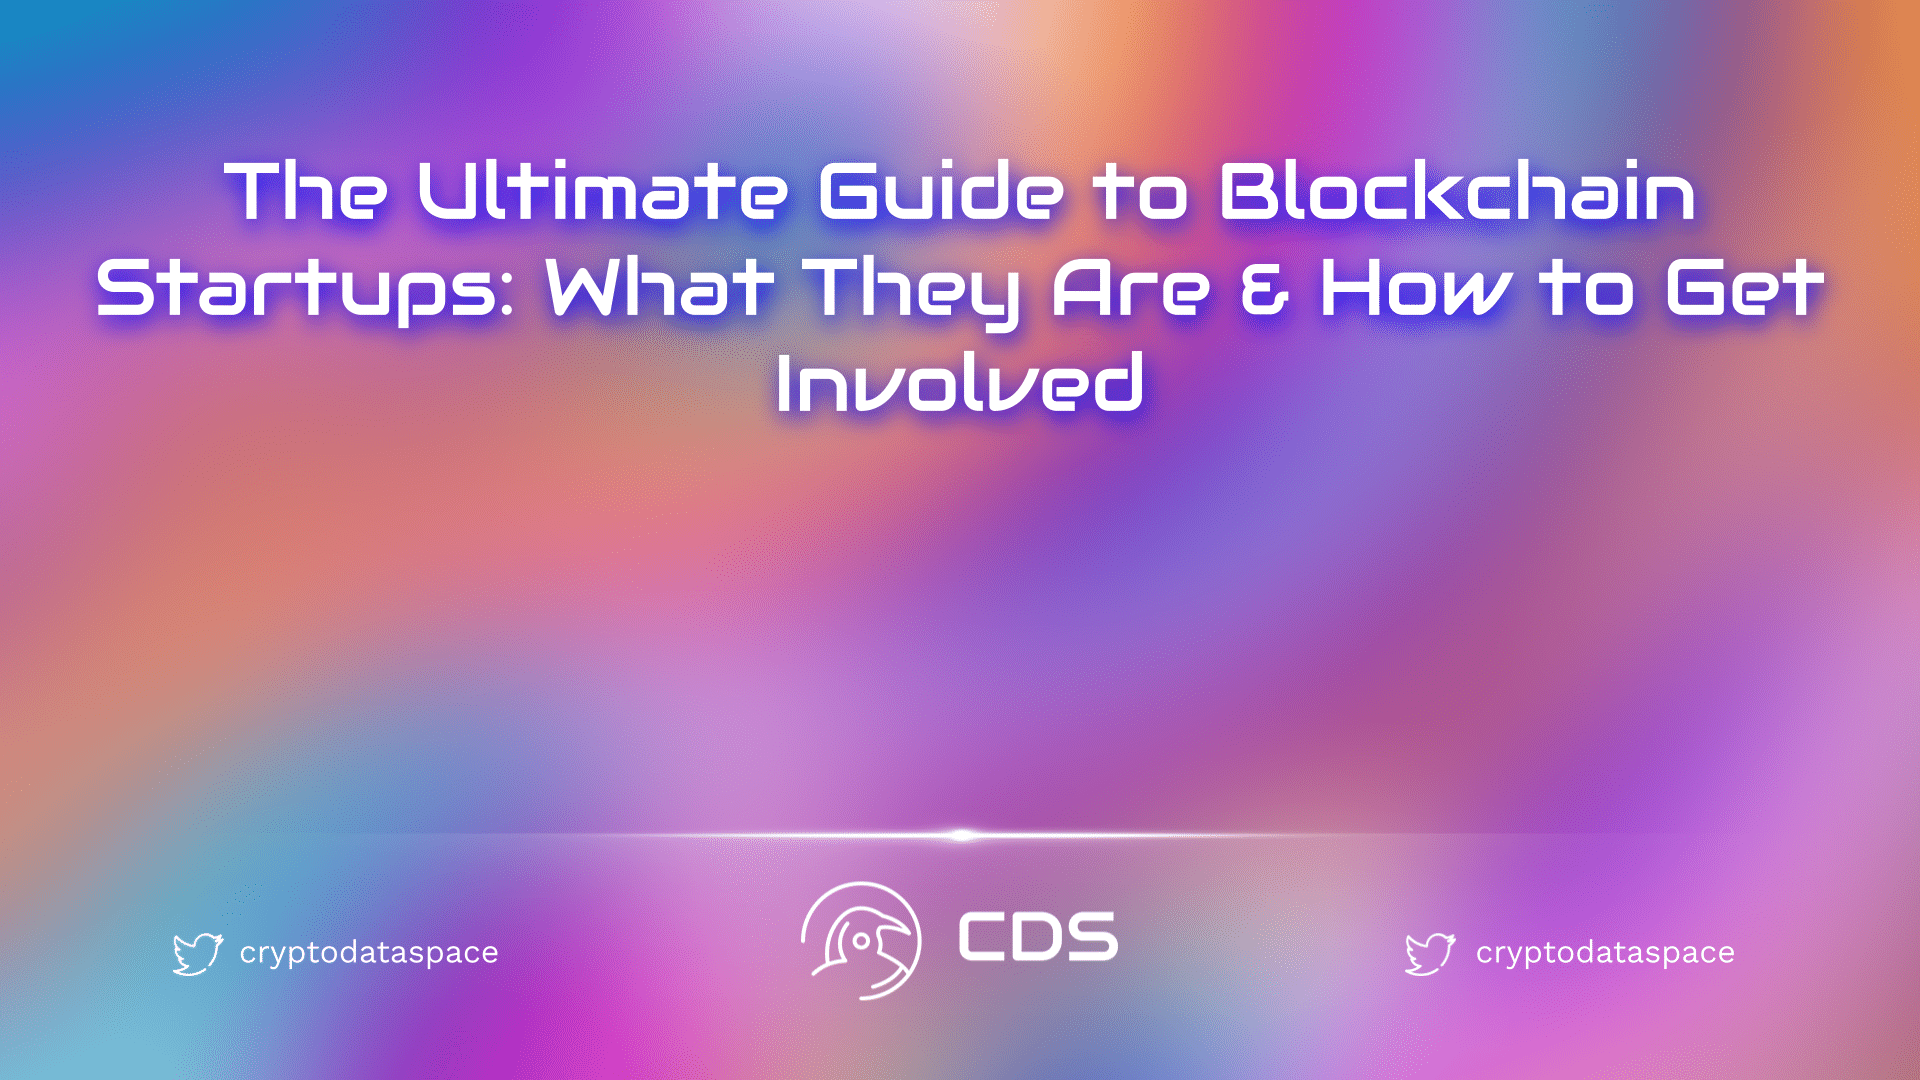 The Ultimate Guide to Blockchain Startups: What They Are & How to Get Involved